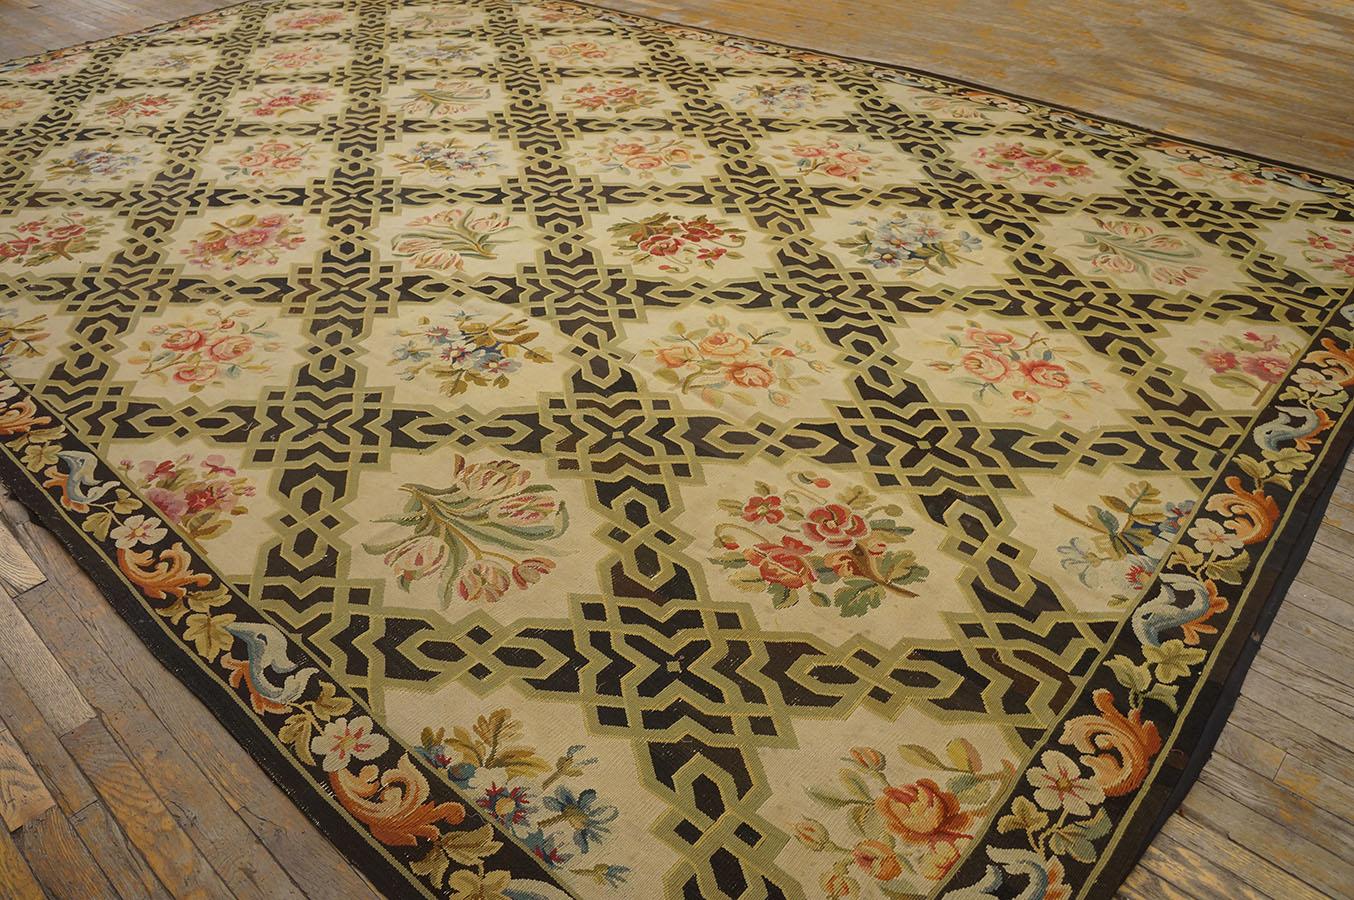 Early 20th Century French Aubusson Carpet ( 9' 8'' x 15' 3'' - 295 x 465 cm ) For Sale 9